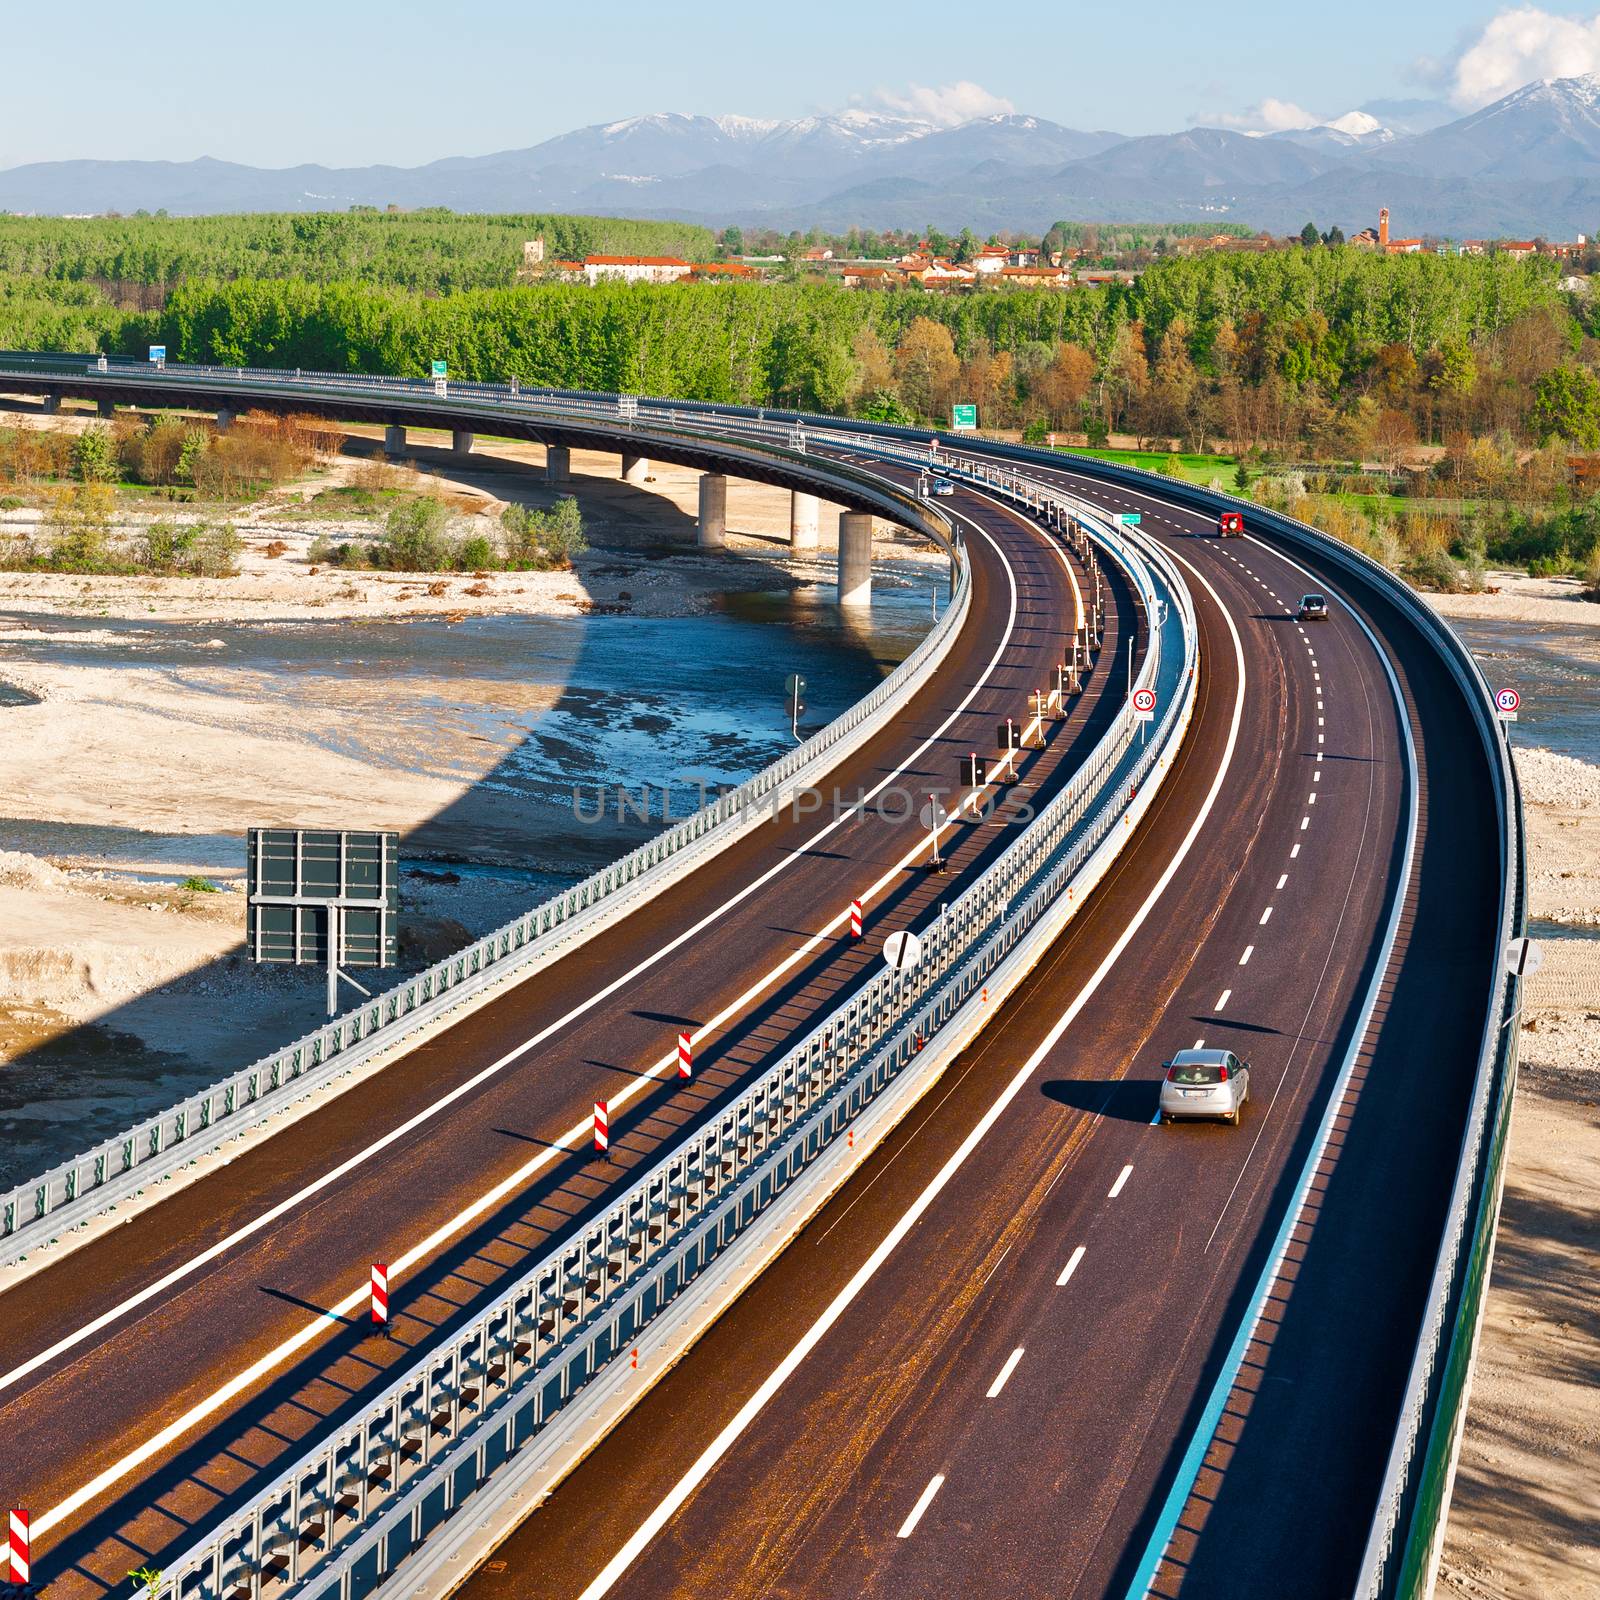 The Modern Highway in Piedmont on the Background of Snow-capped Alps in Italy